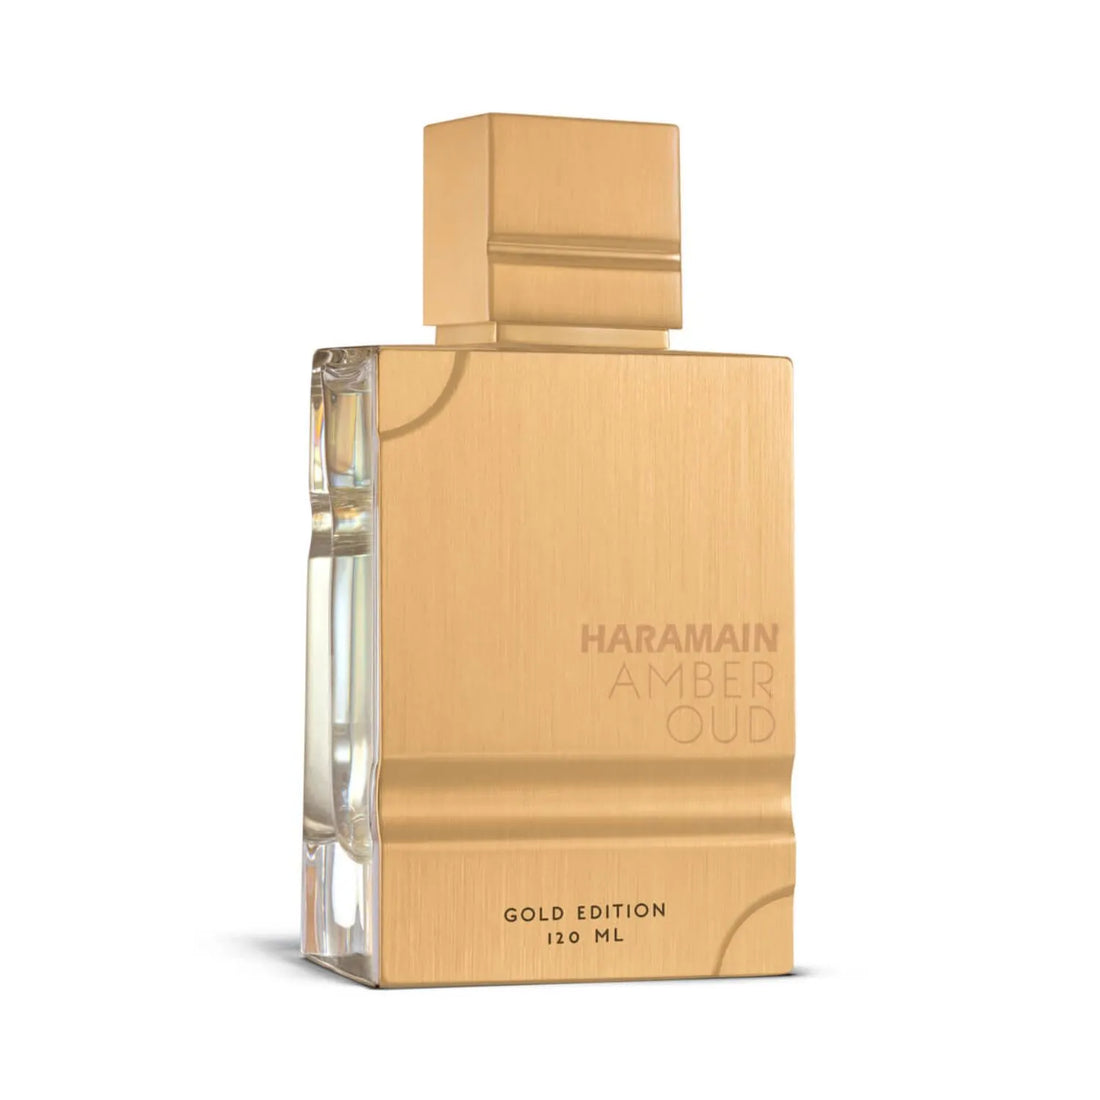 Amber Oud Gold Edition Perfume Bottle